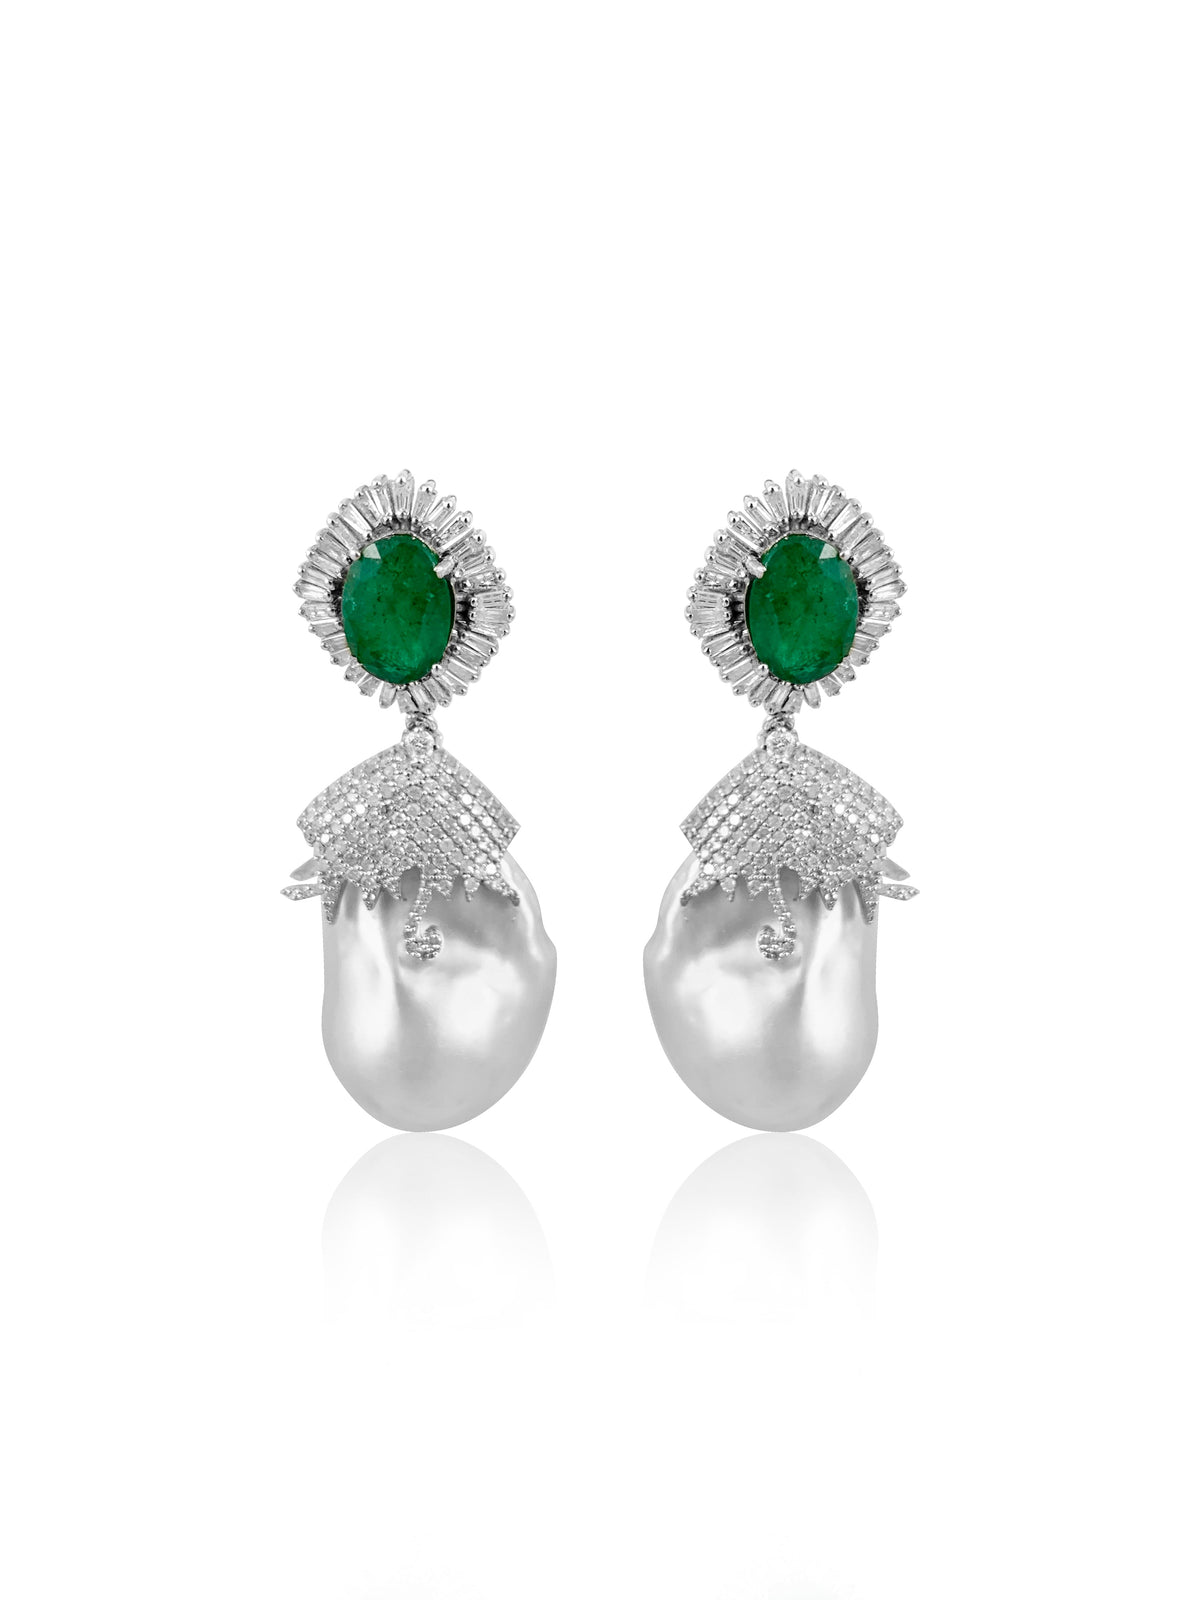 Baroque Pearl with Emerald & Diamond Baguettes Earrings  Diamonds: 4.50 ct Emerald: 4.66 ct Pearl Barroque: 88.20 ct Silver with Rhodium Plated weight: 10.15 grams Gold Post: 0.15 grams